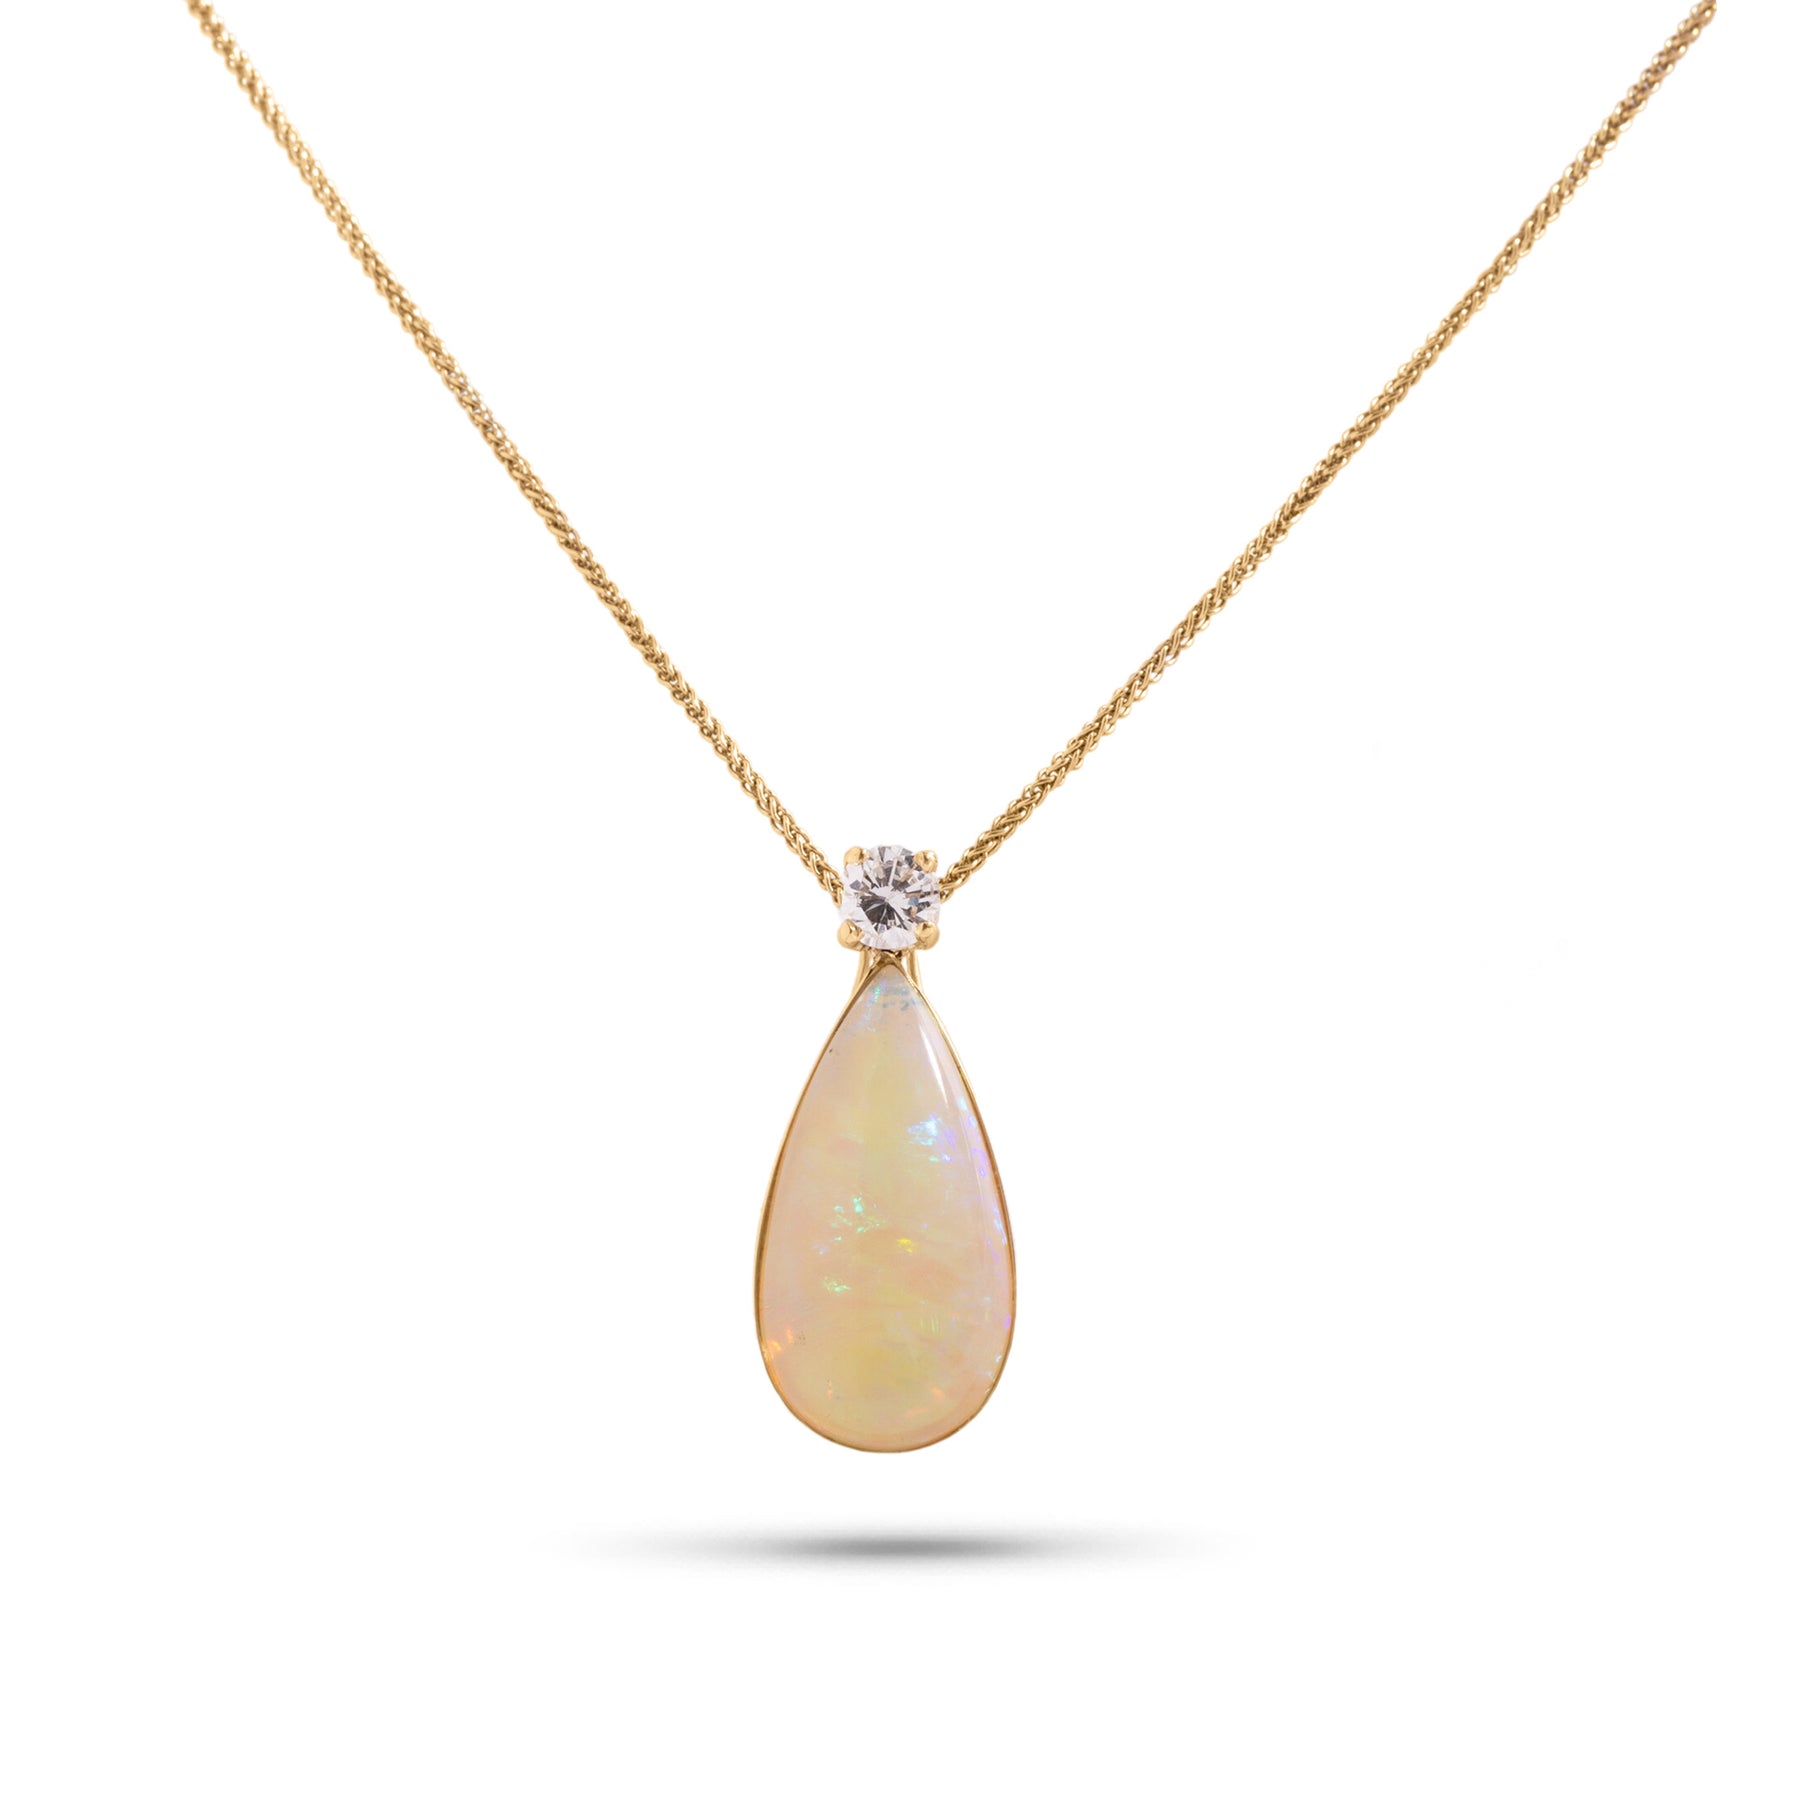 14k yellow gold estate pear shape opal and round diamond pendant necklace 18 inches